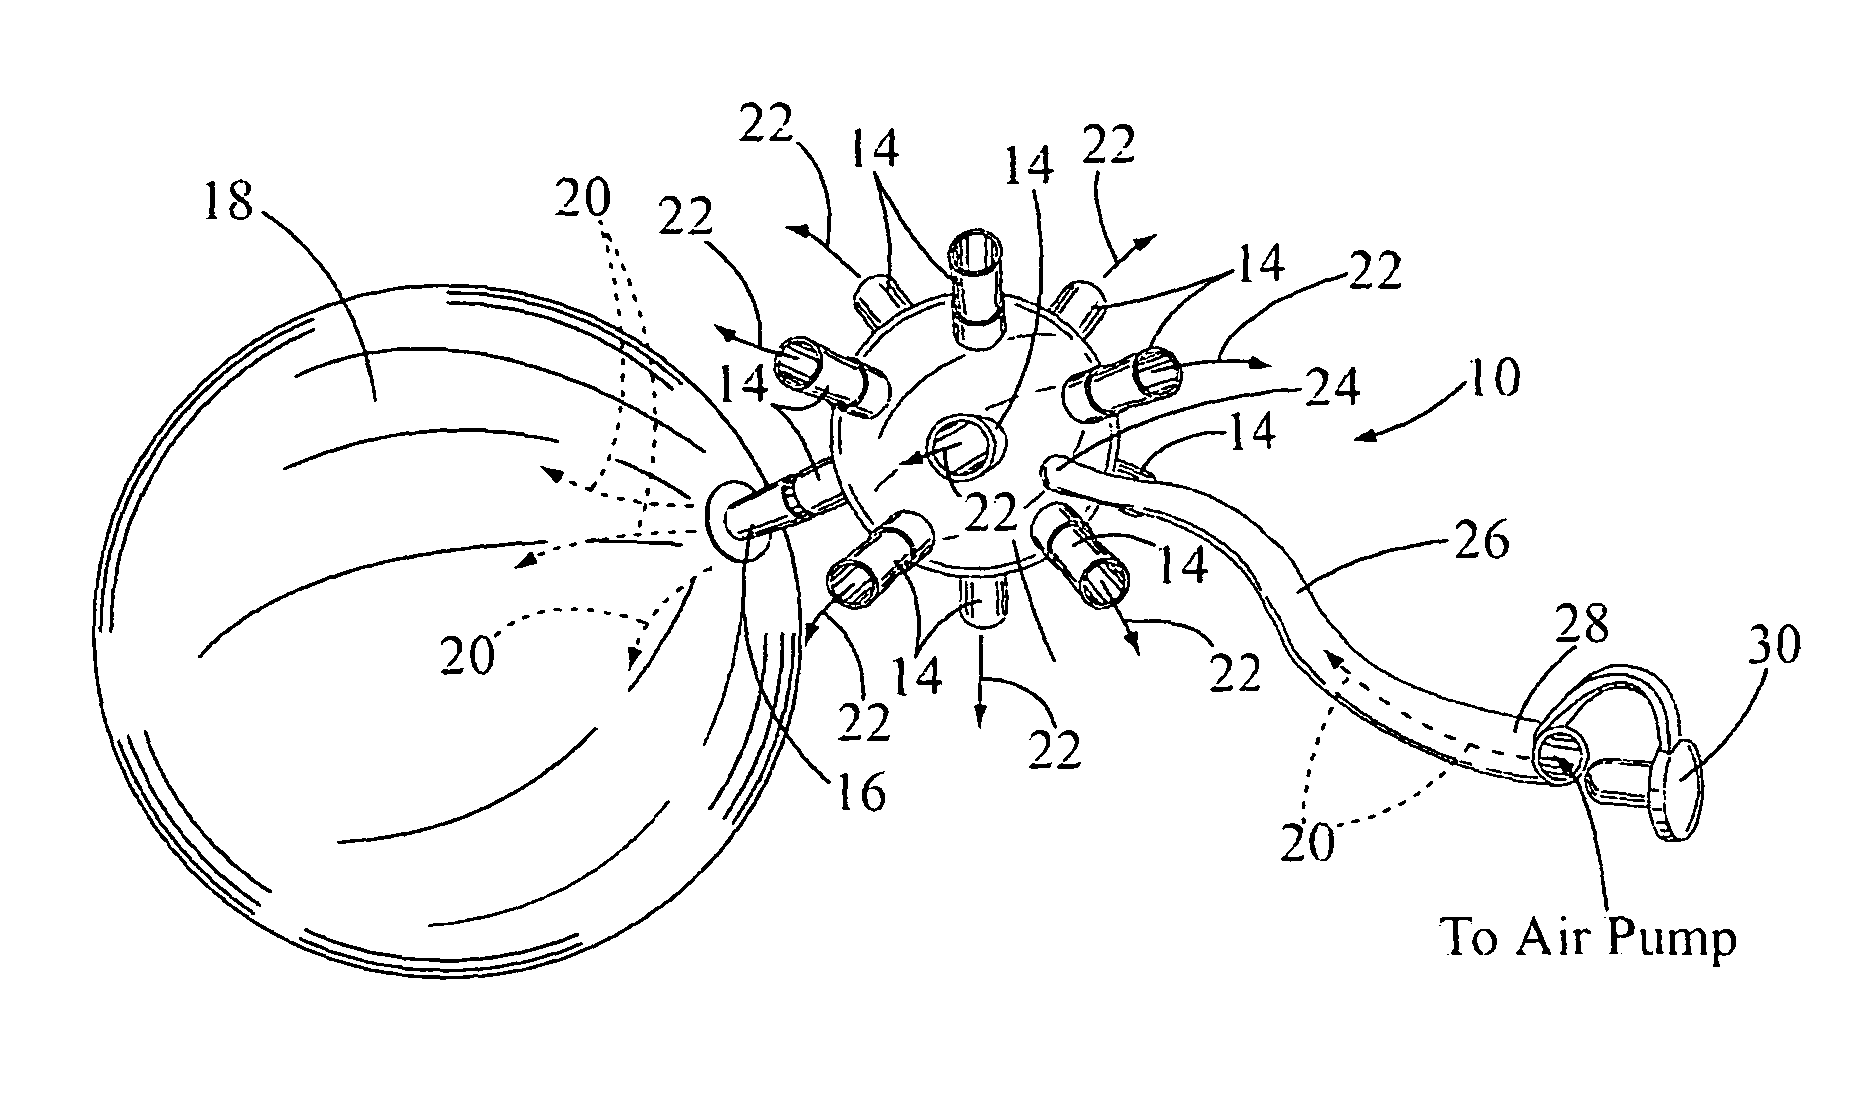 Air manifold attached to a plurality of balloons for inflating and deflating a balloon cluster used in decorative showroom and party displays